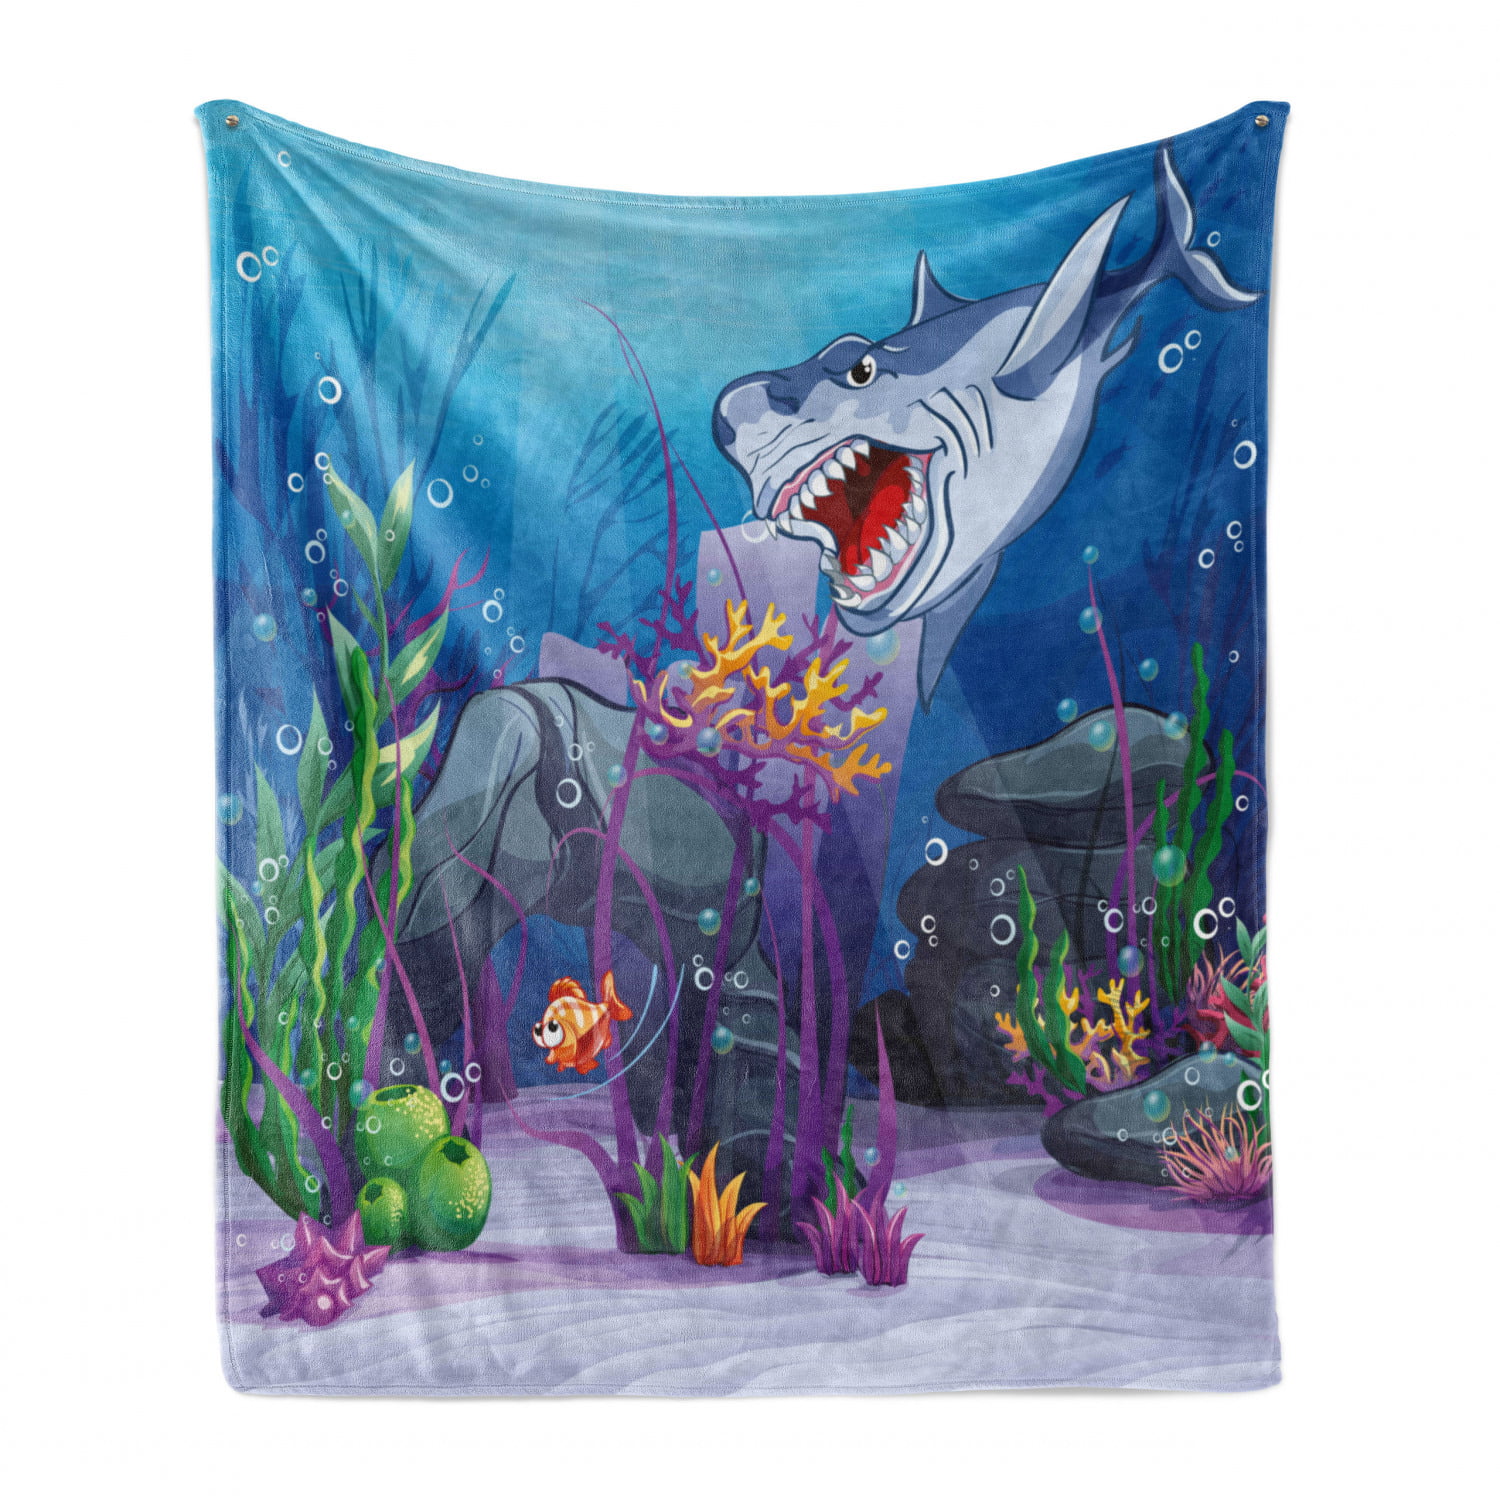 50 x 60 Colorful Abstract Designs with Hawaiian Elements Hibiscus Marine Reptiles Flowers Multicolor Cozy Plush for Indoor and Outdoor Use Lunarable Turtle Soft Flannel Fleece Throw Blanket 